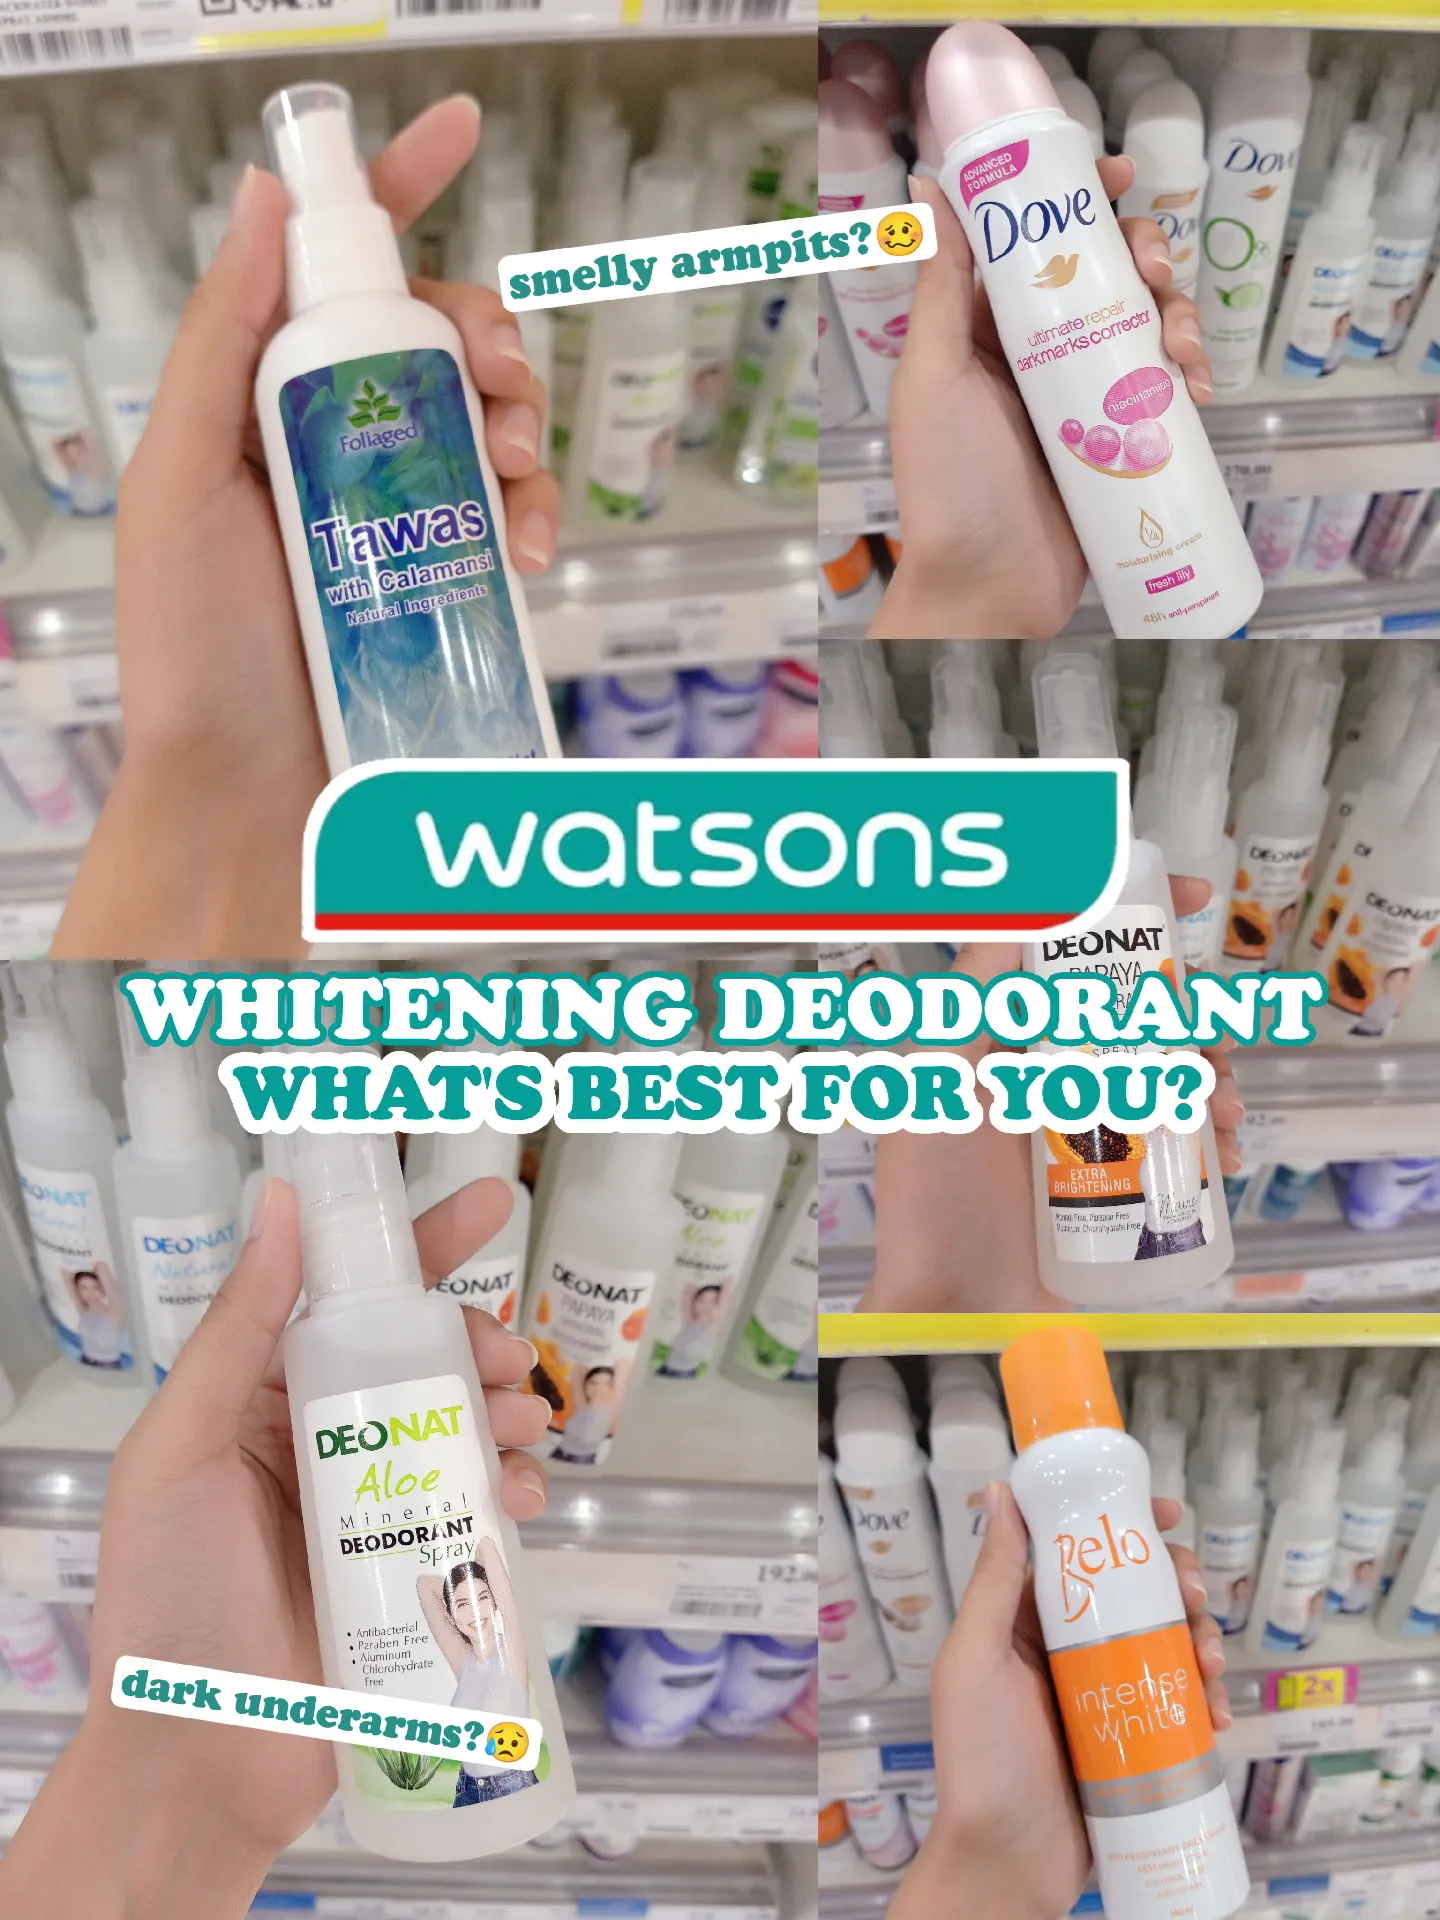 WATSONS WHITENING DEODORANT! What's best for you?🤔 Hi lemonadies, Do you  have dark underarms? What's